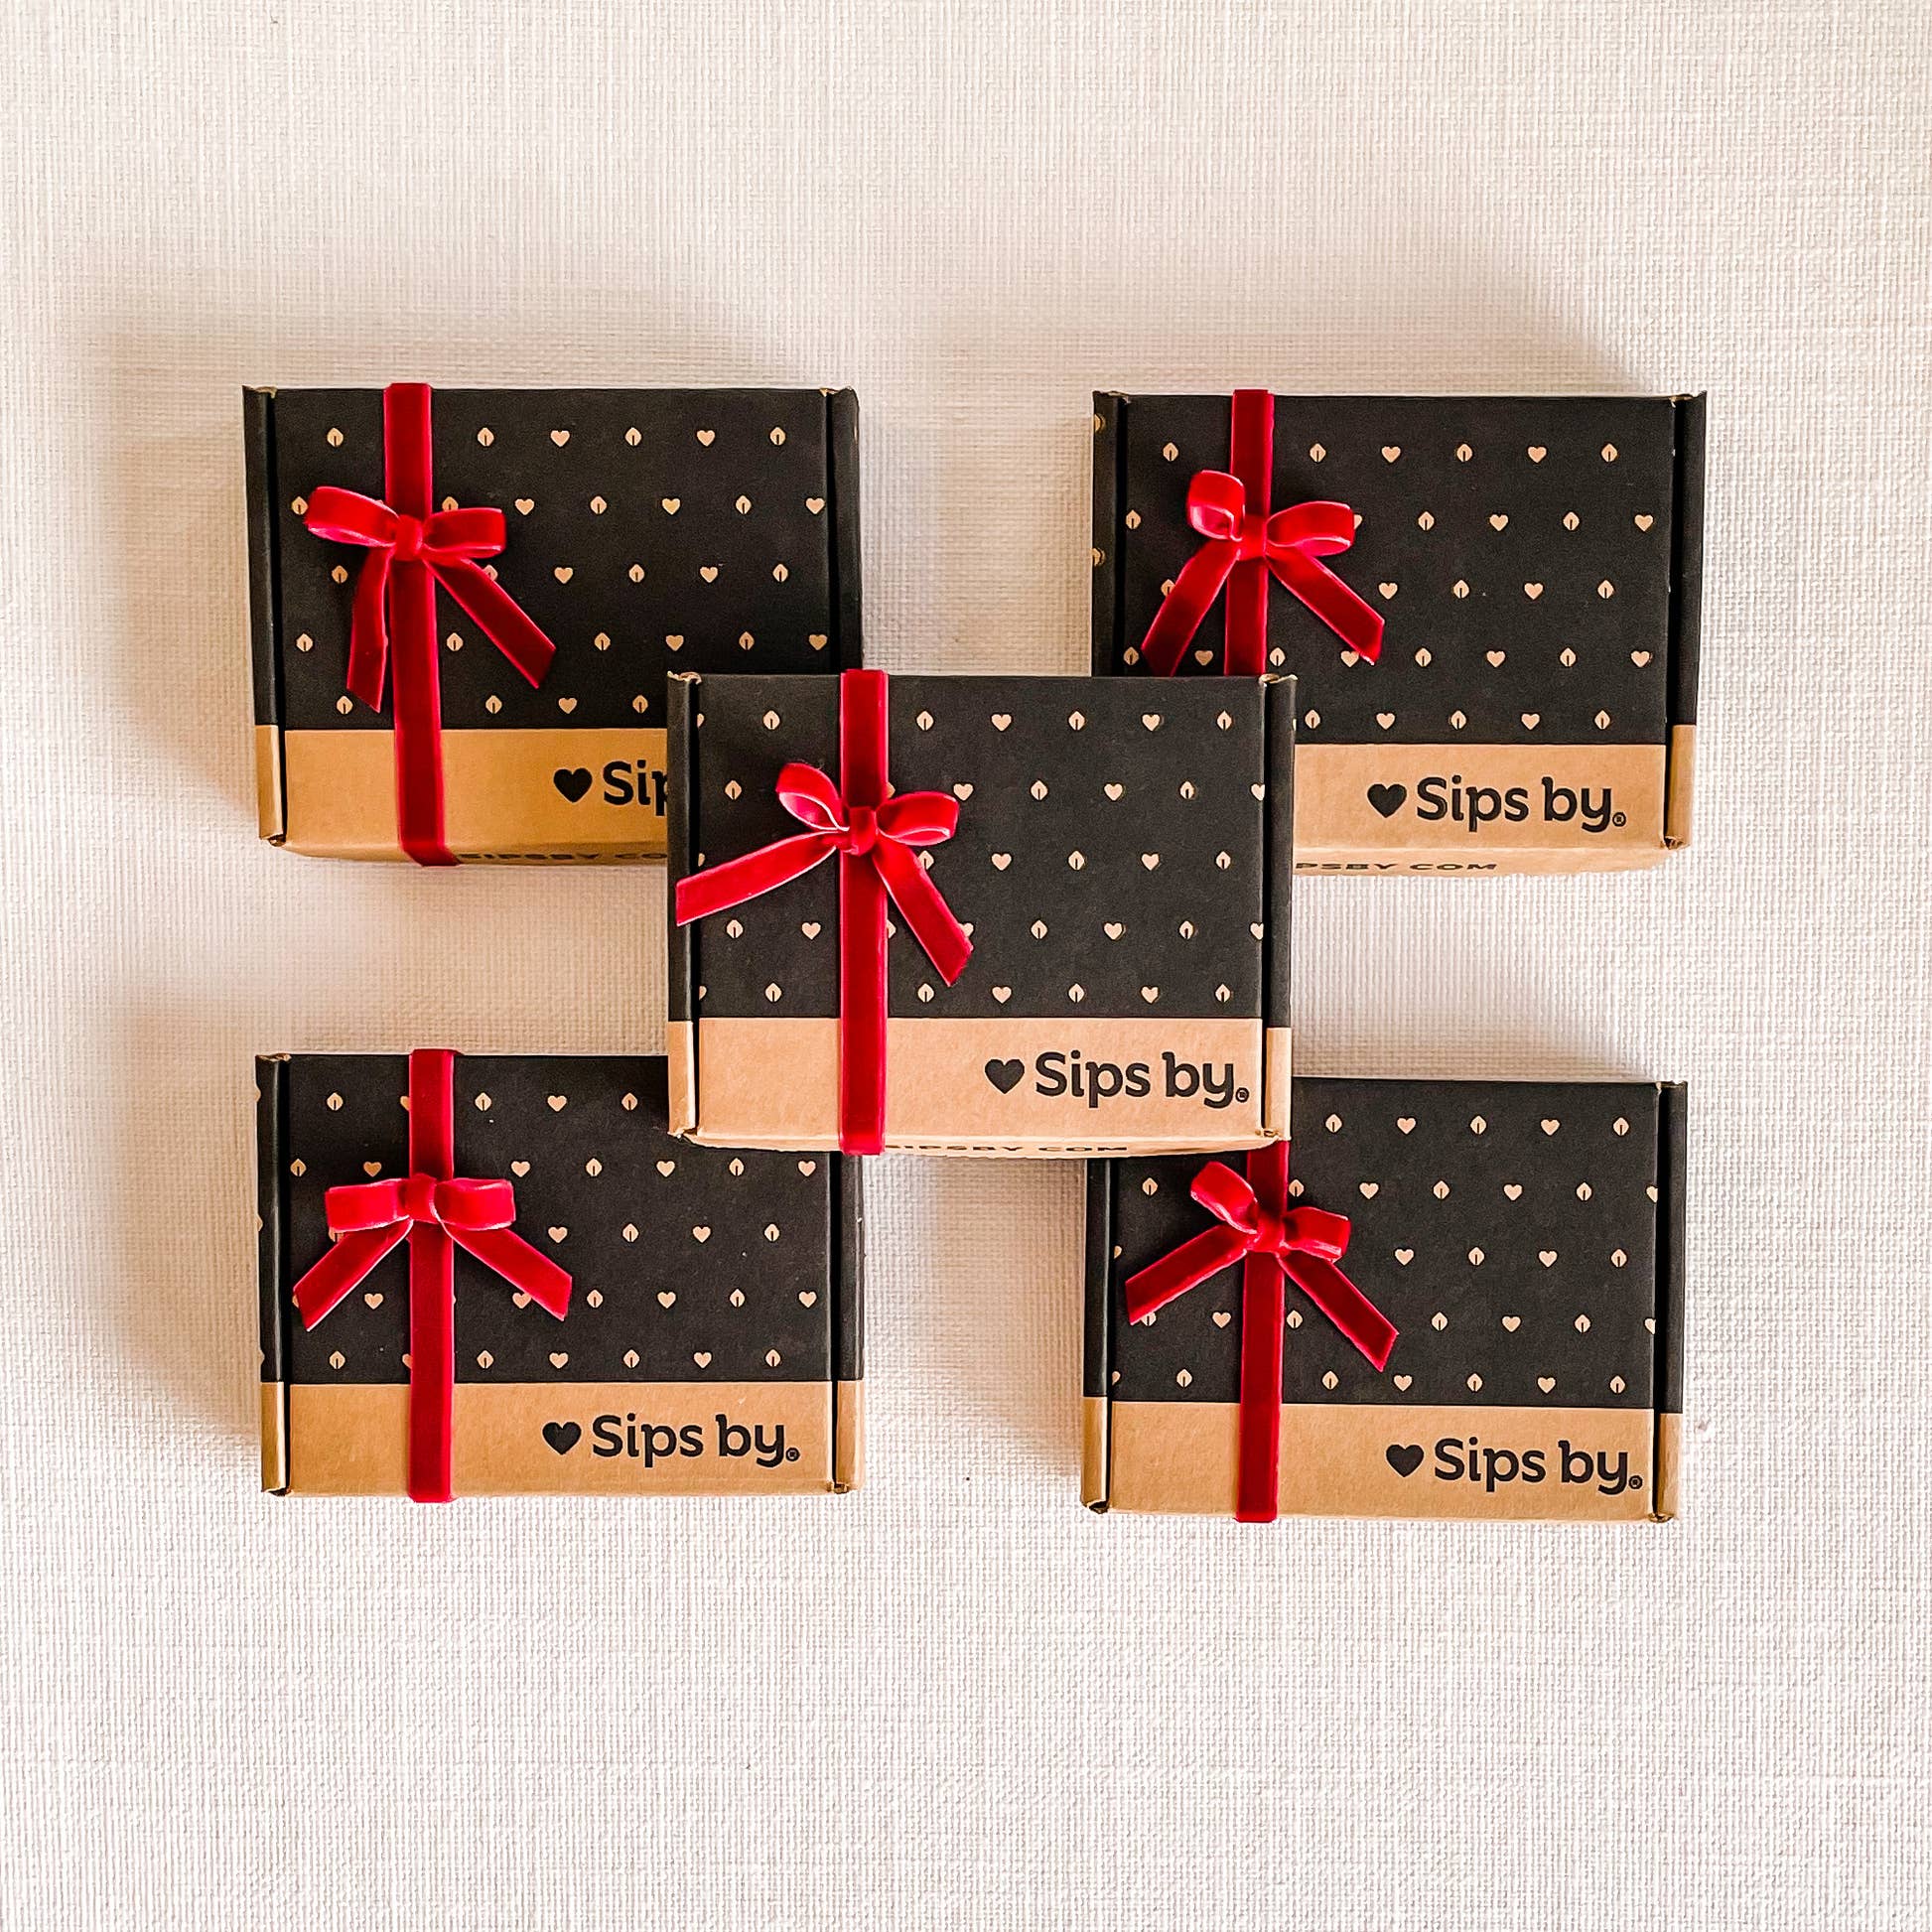 the mini box: Gift a Cup of Tea at Sips by